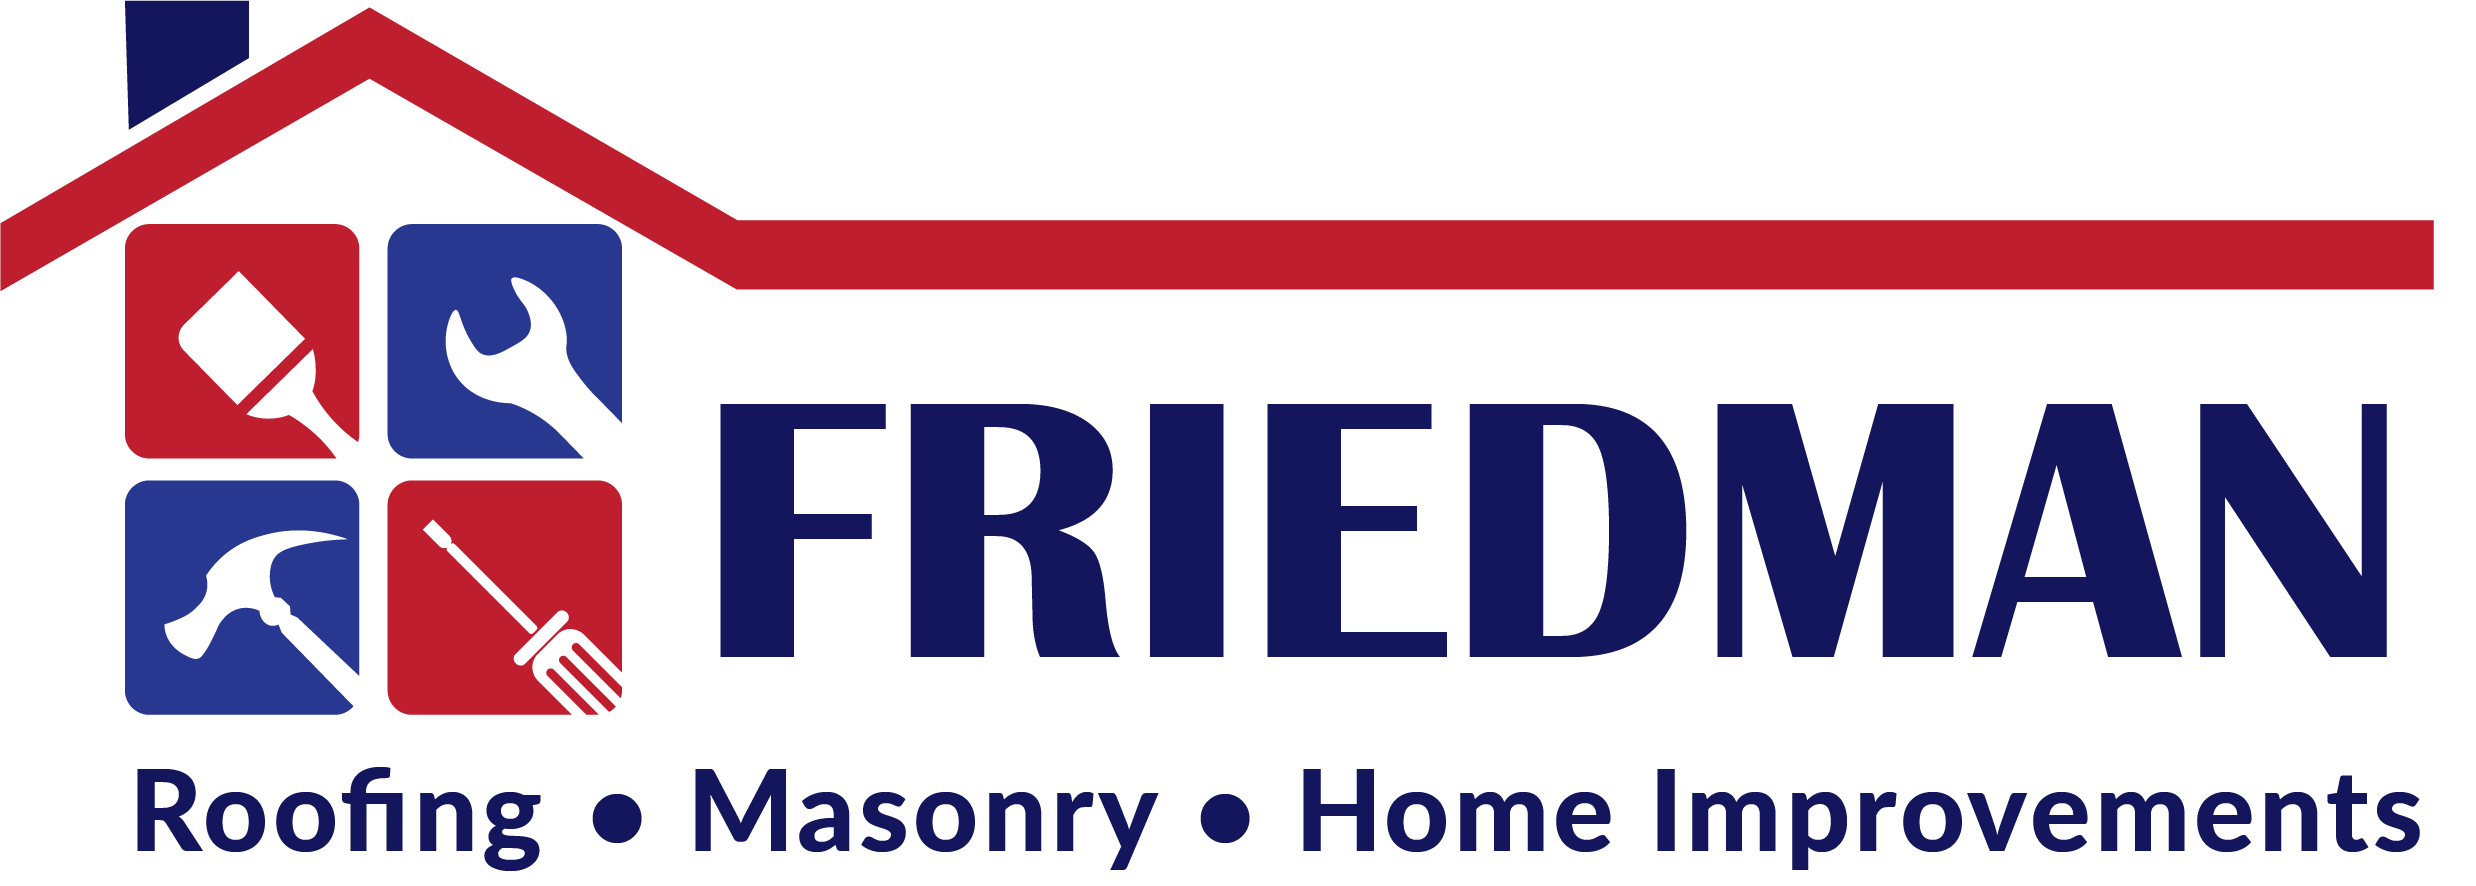 Friedman Home Improvements Is A Top-Rated Roofing Company That Offers Roofing Services In Fairborn